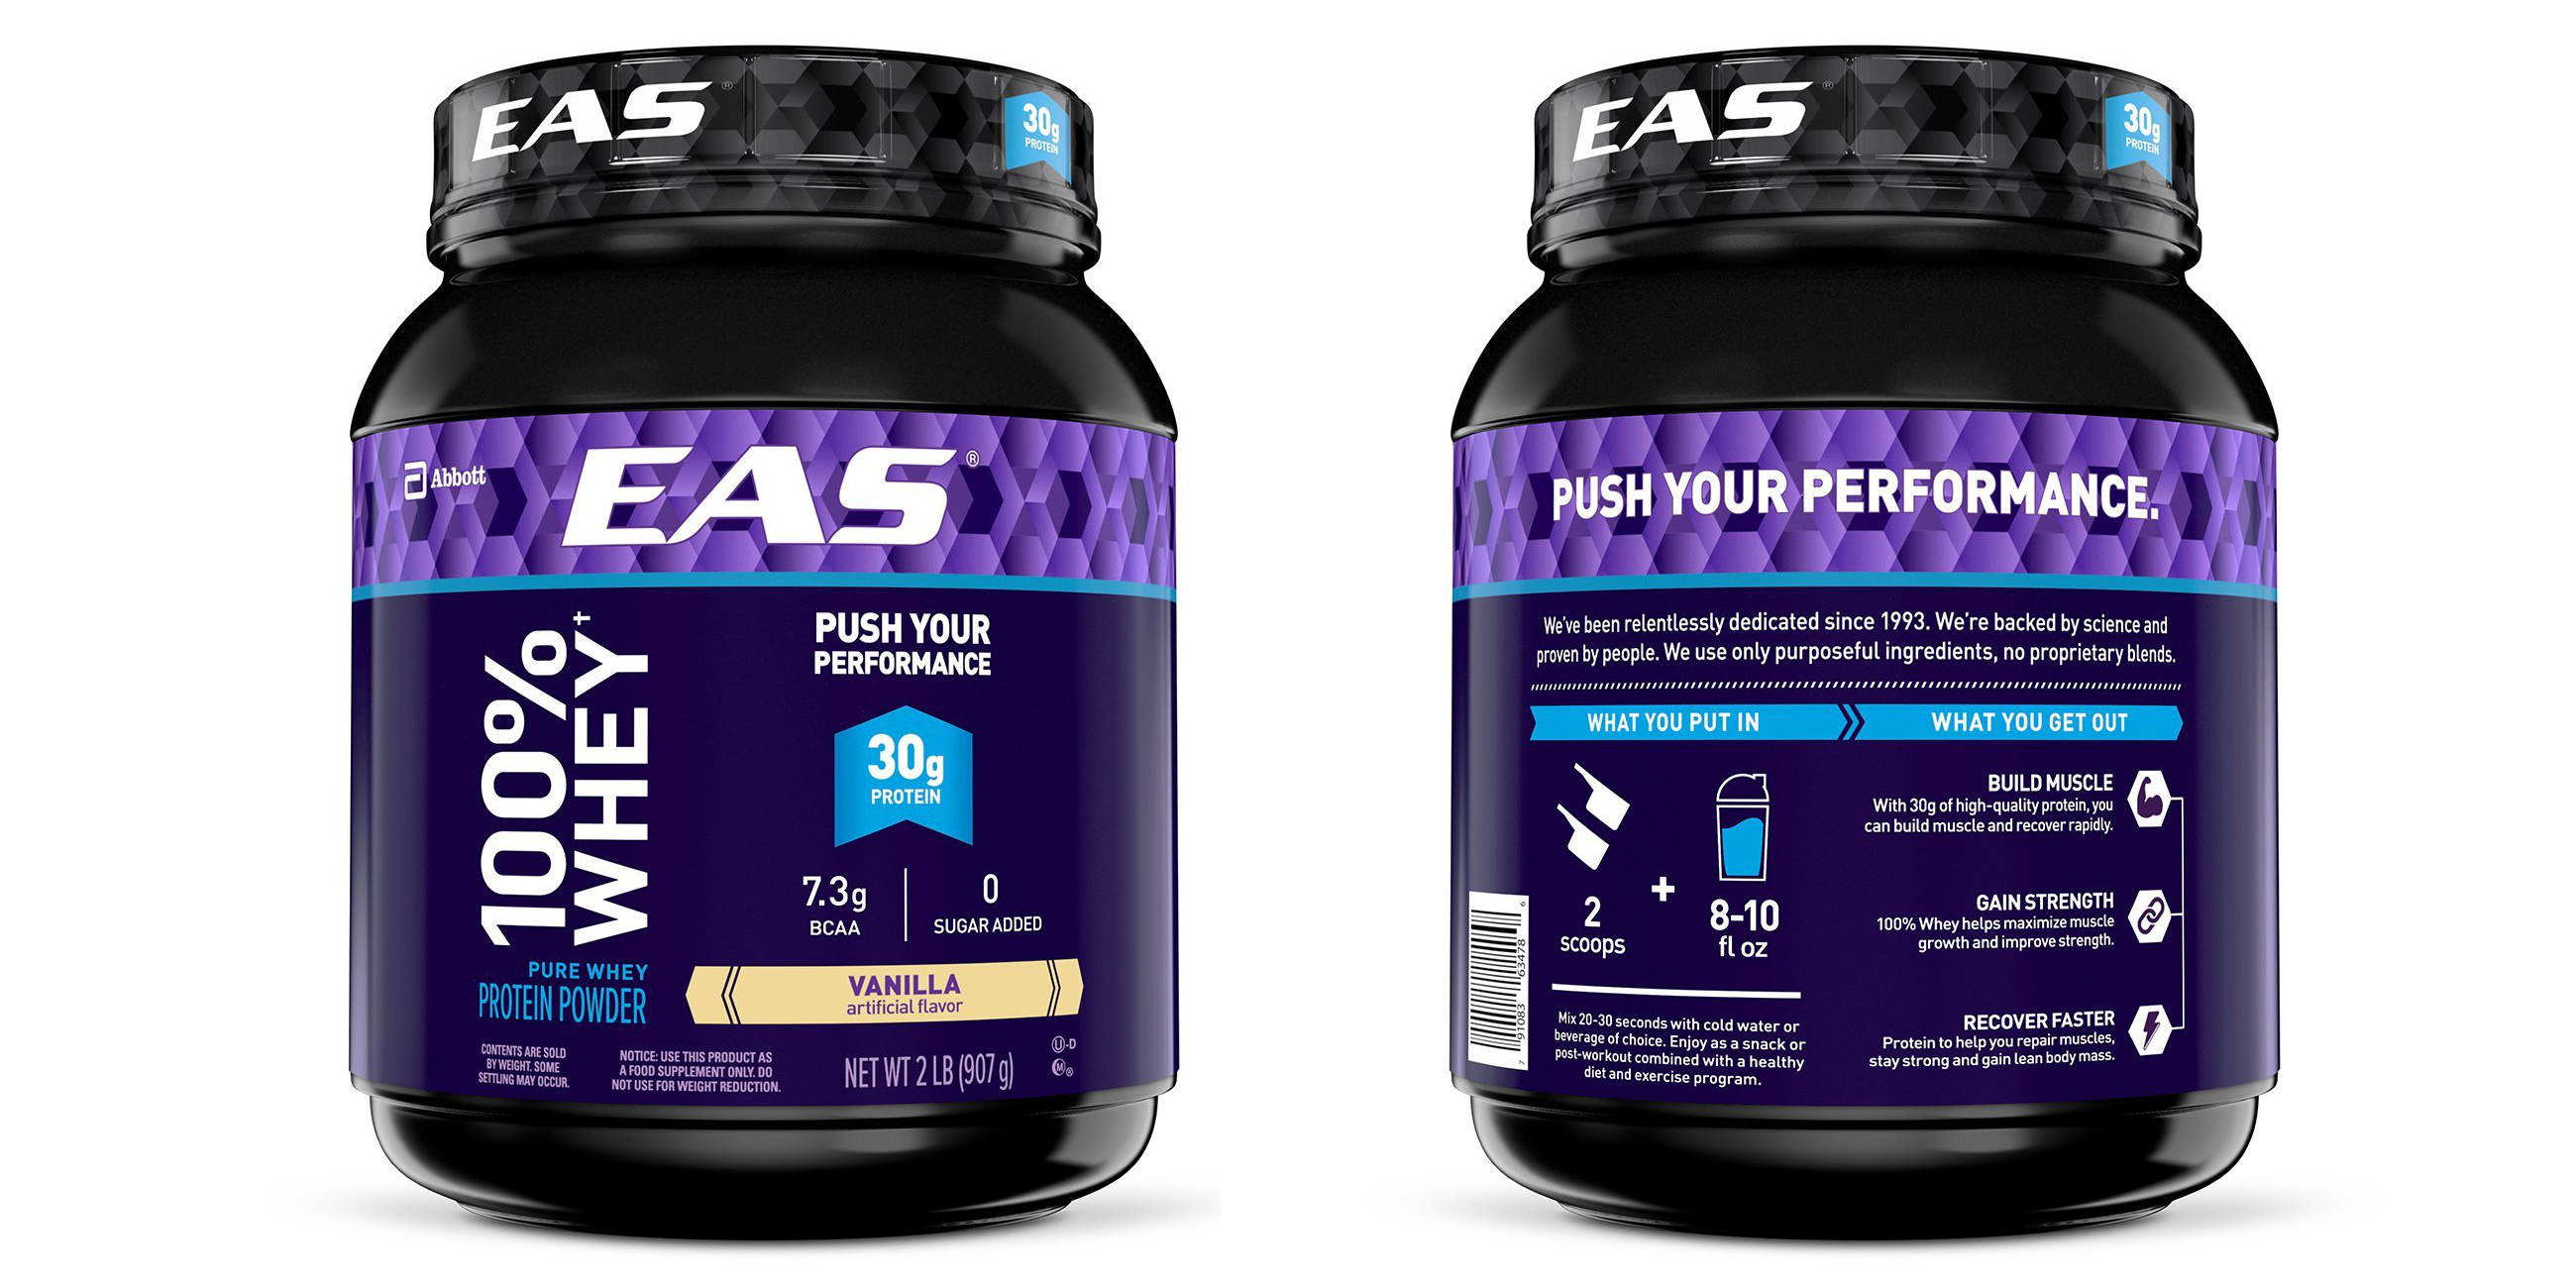 eas-my-protein